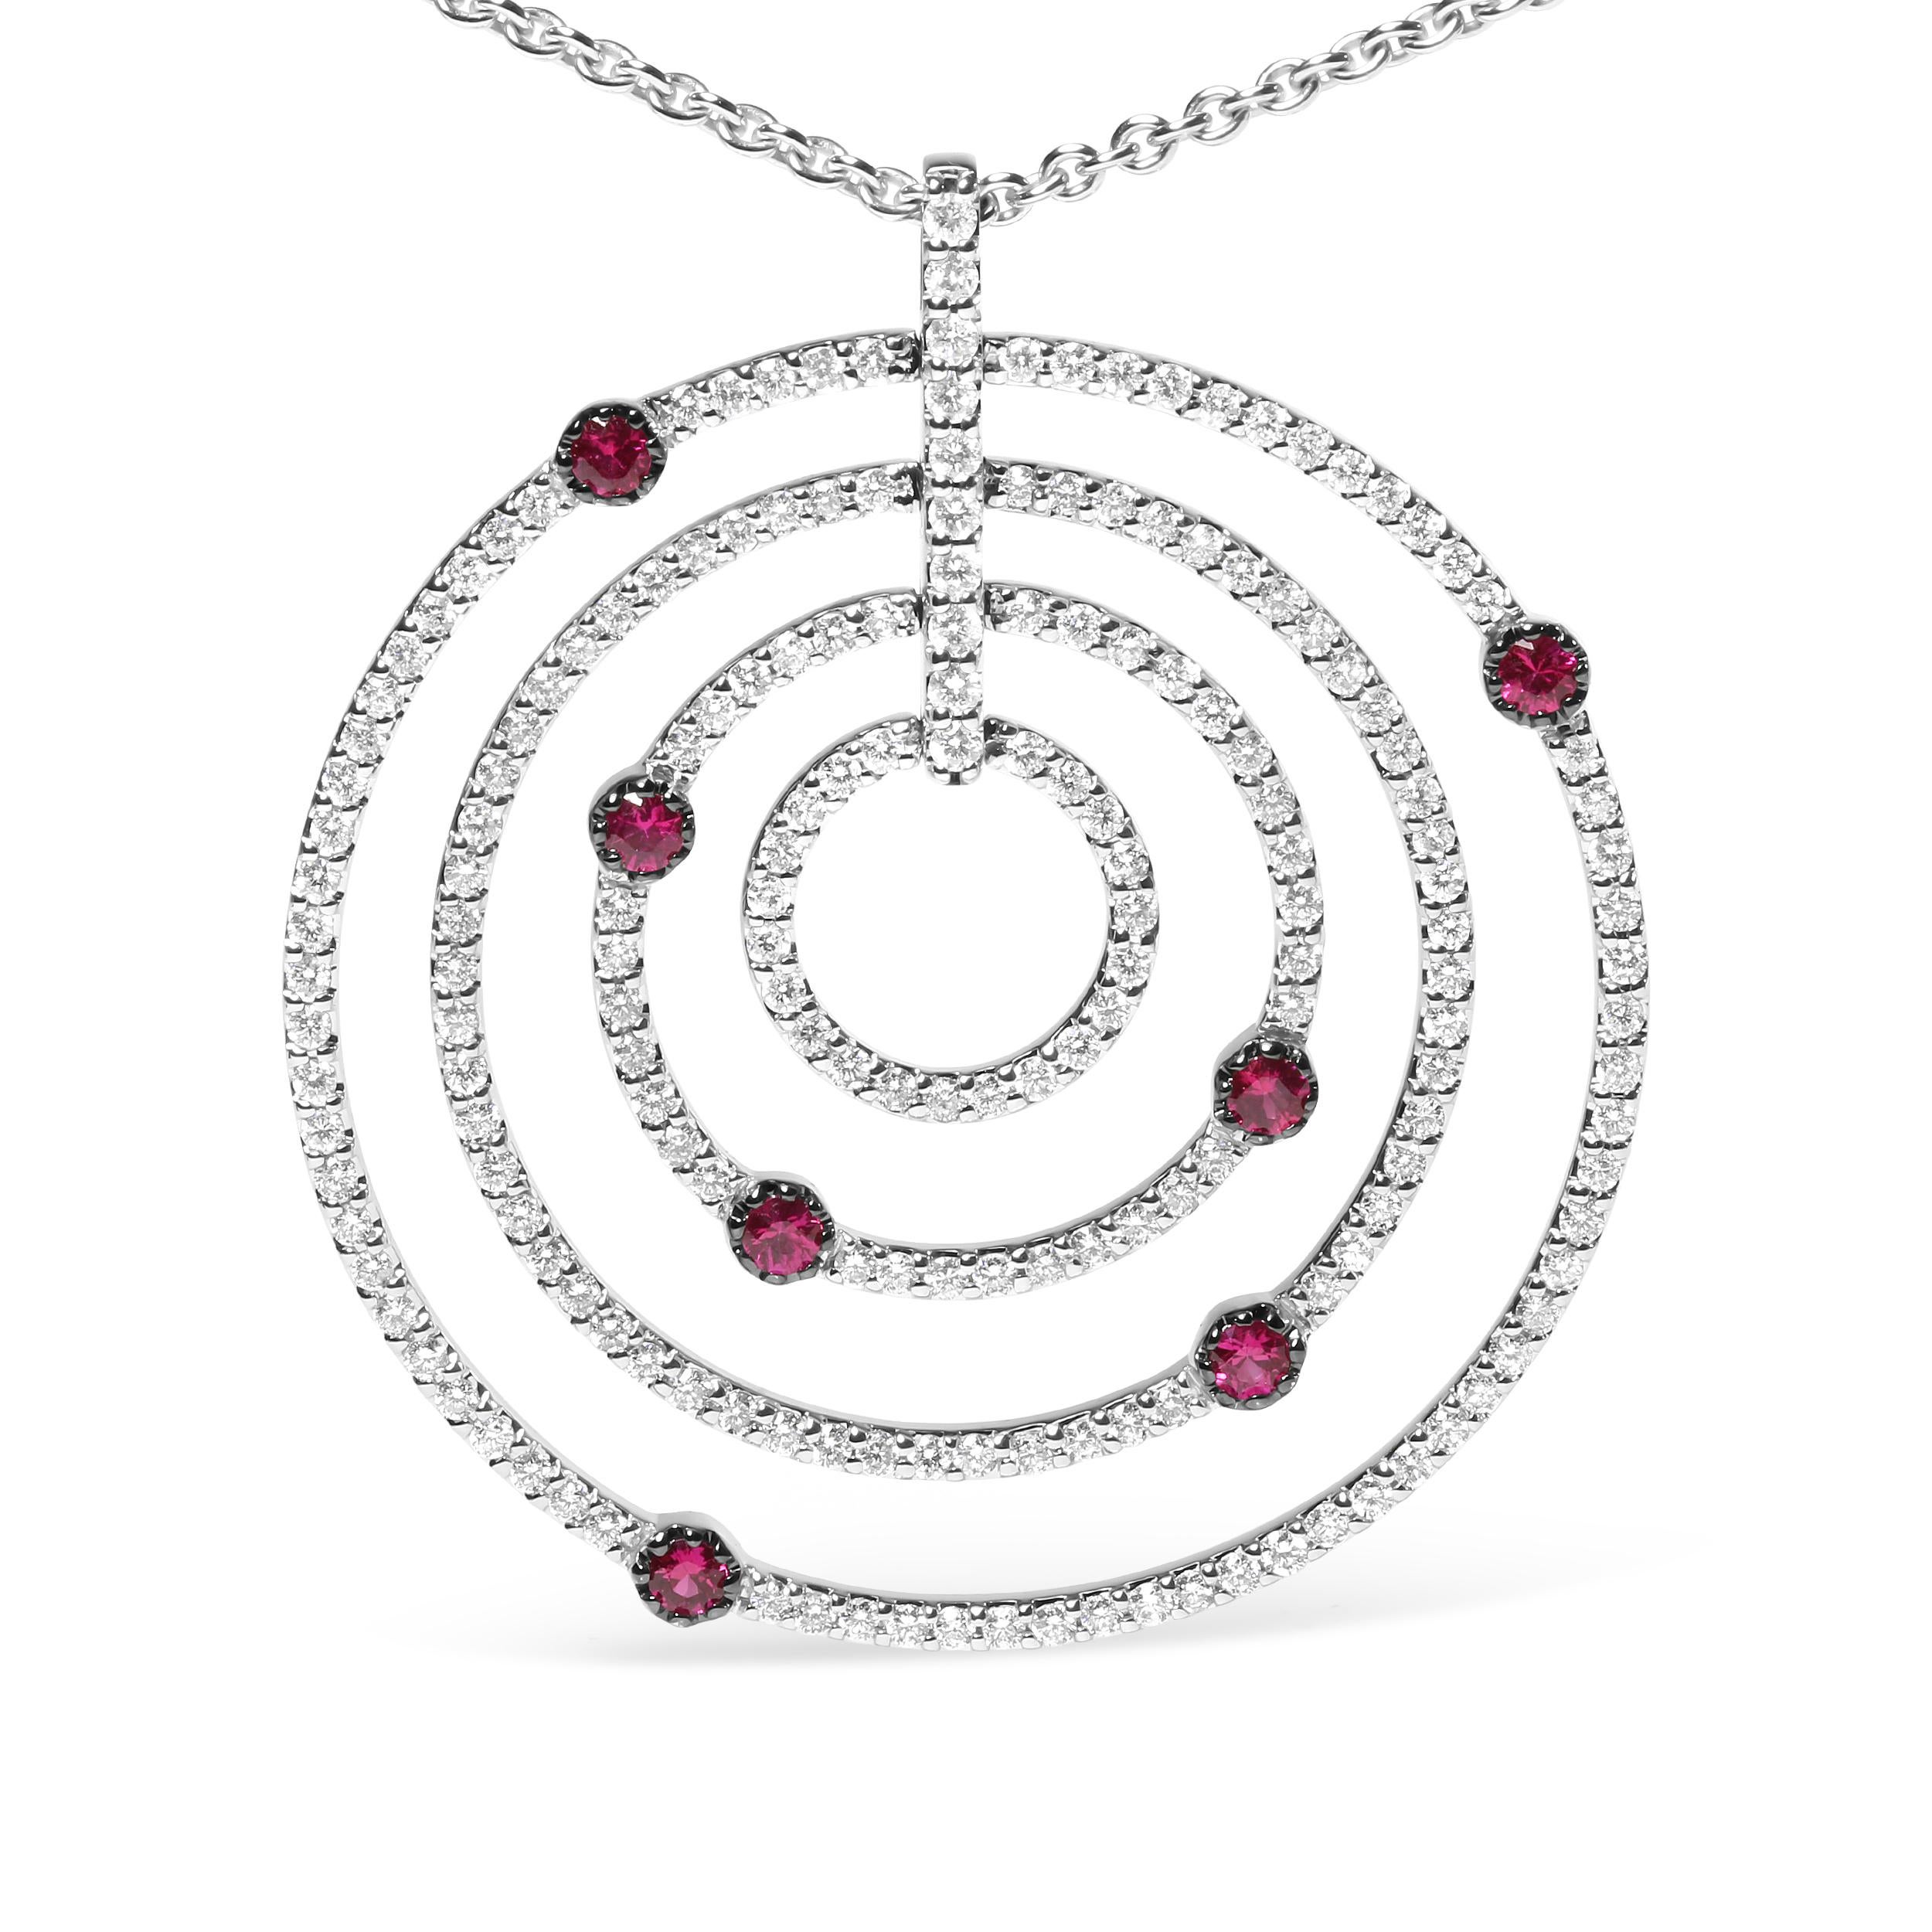 This statement pendant necklace showcases multiple rows of sparkling round diamonds pave-set in concentric openwork circles cast in 18k white gold. These diamonds shimmer and shine in a total 2 1/6 cttw with an approximate G-H Color and SI2-I1